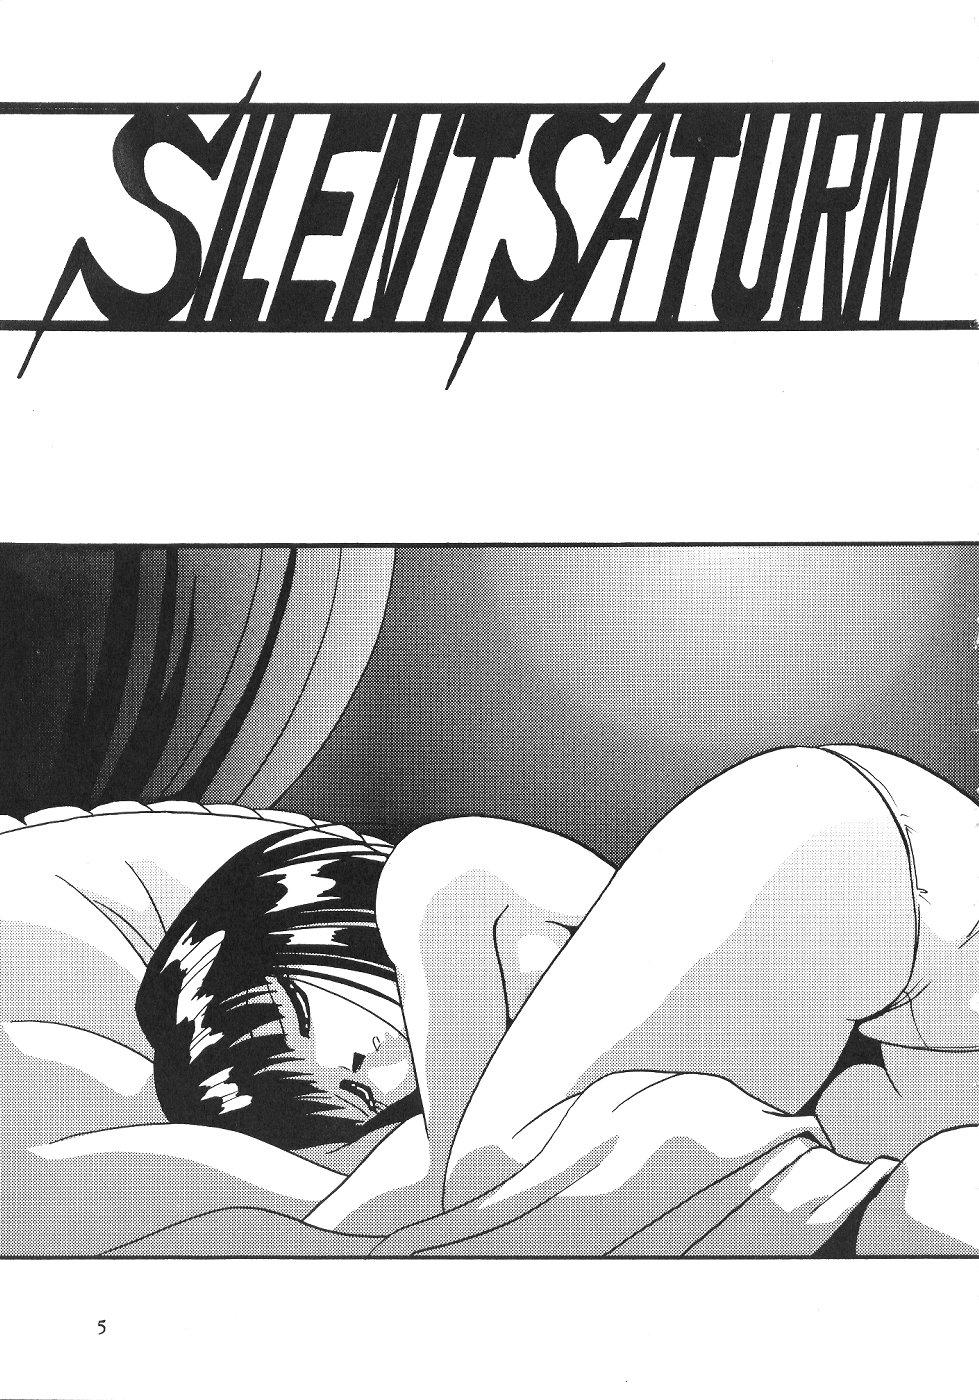 Rough Sex Silent Saturn 11 - Sailor moon Private - Page 5